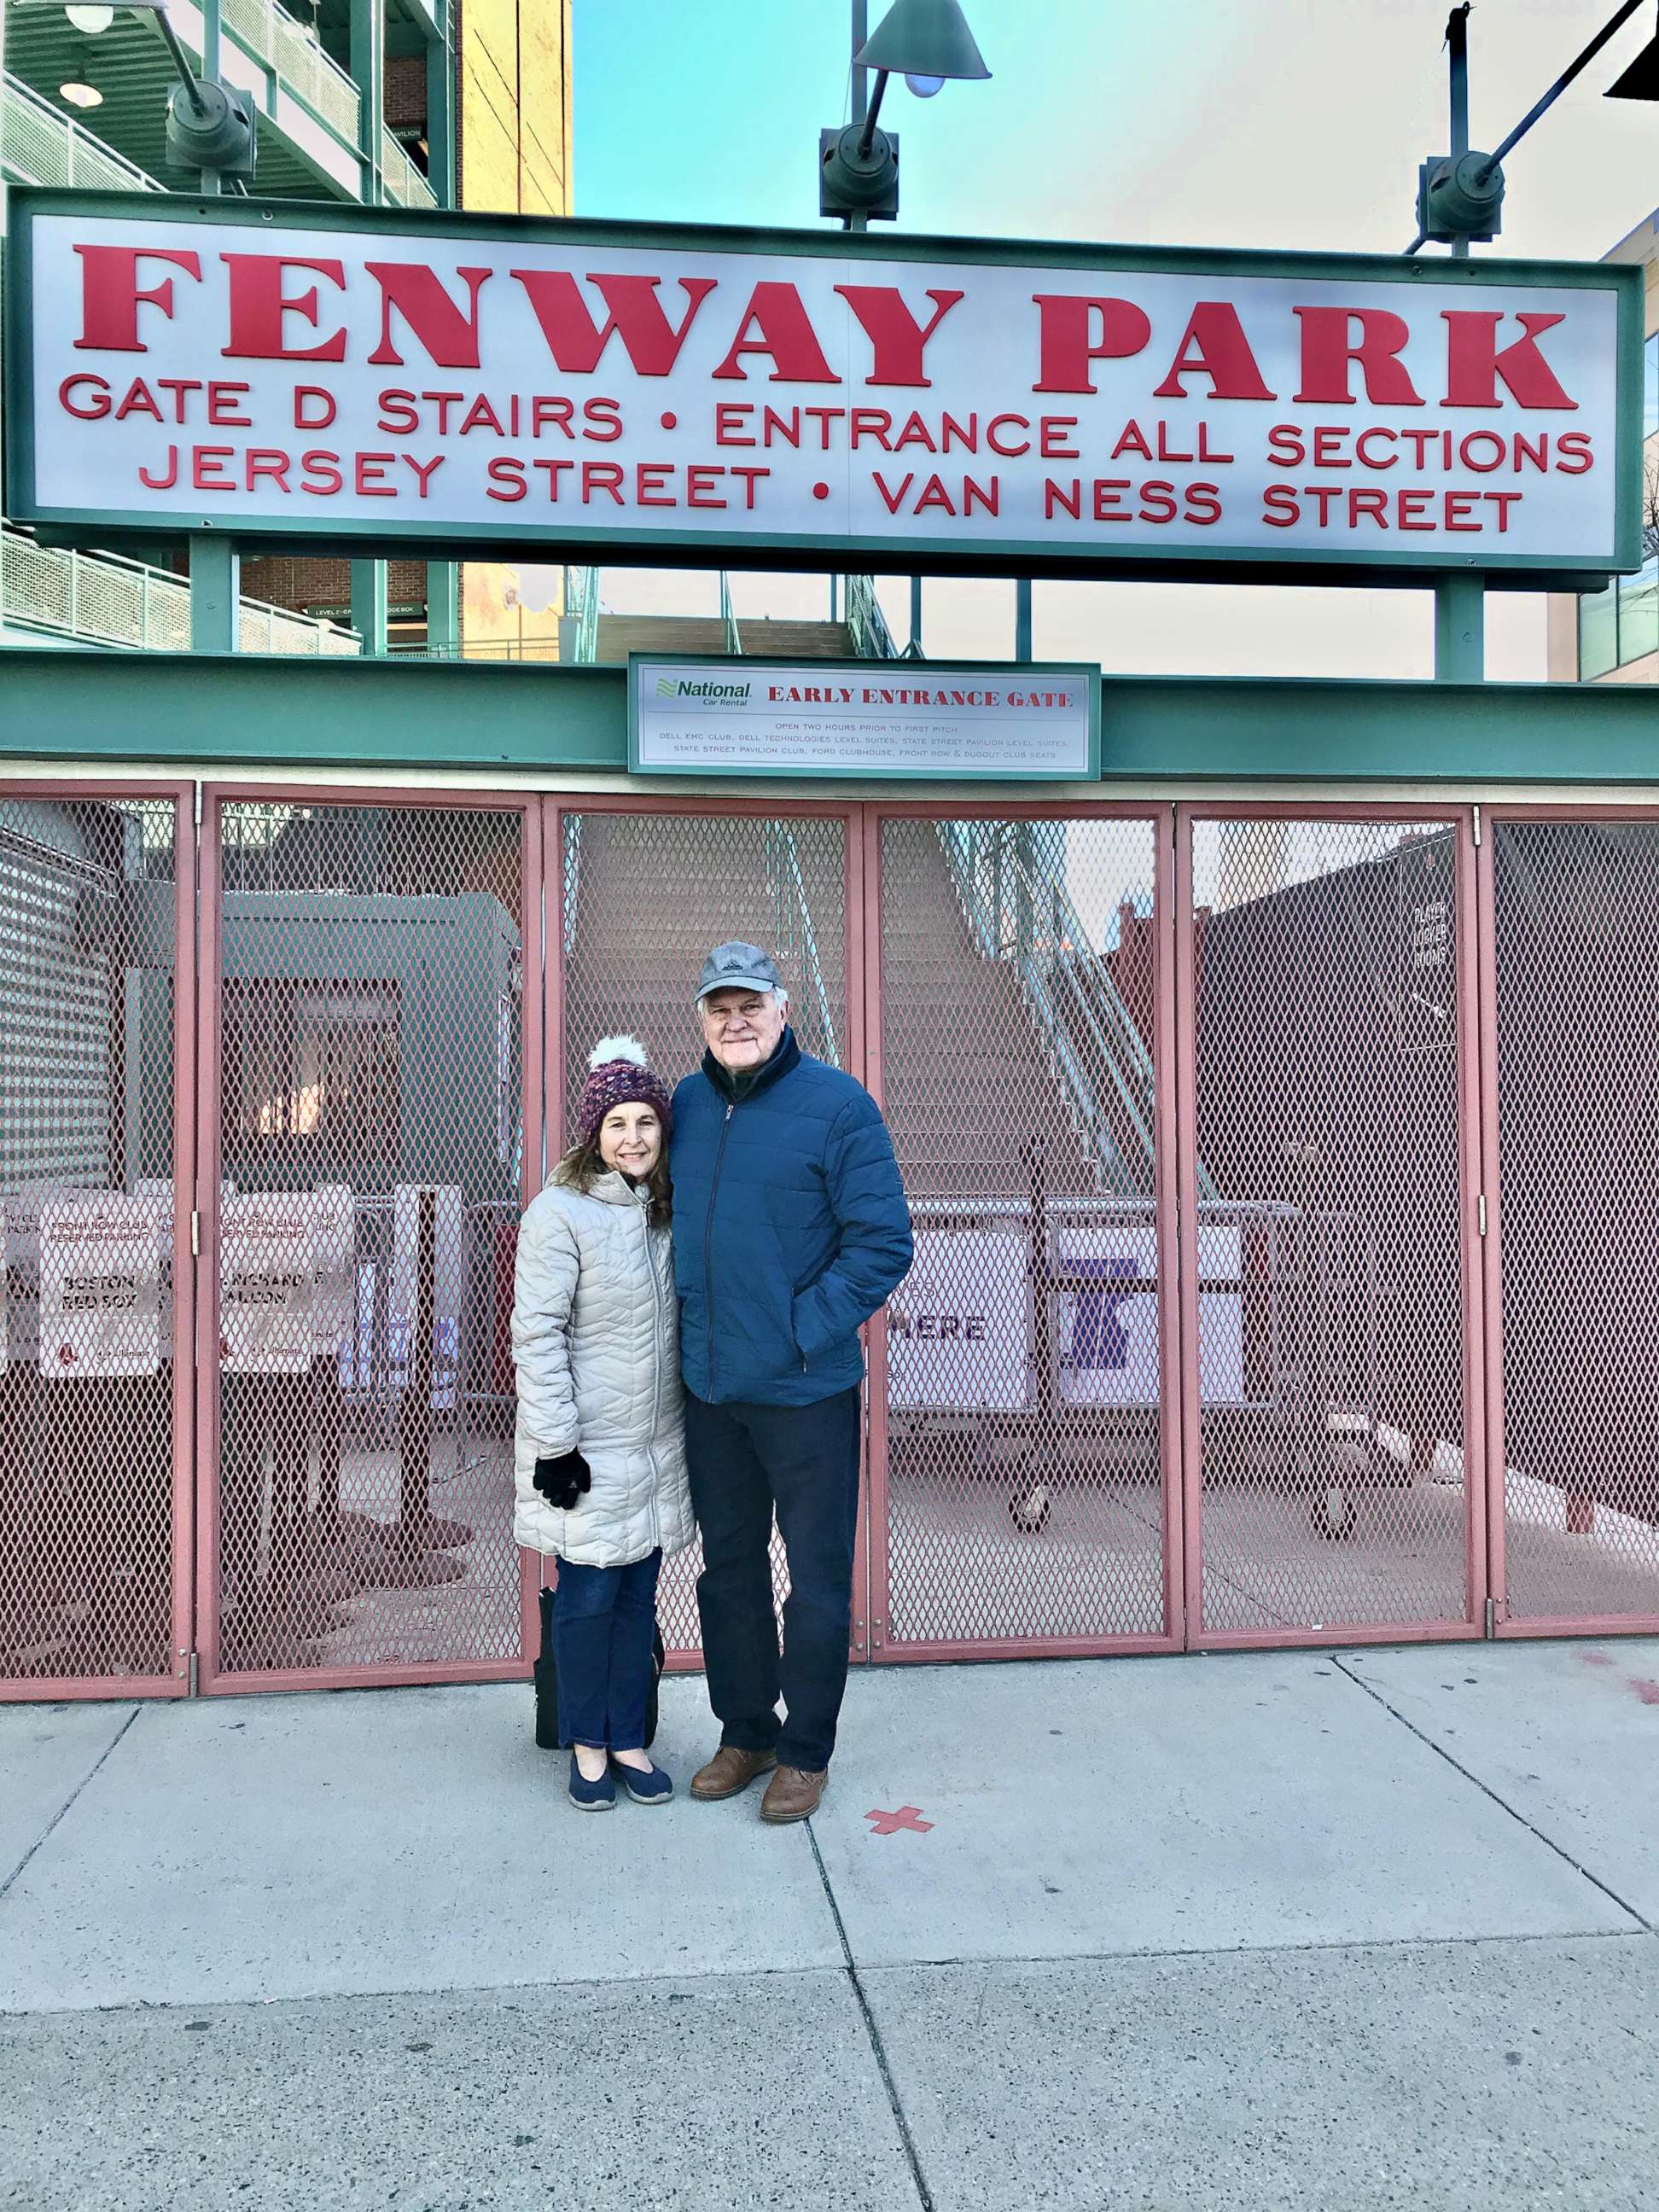 PHOTO: Donna and Thomas Wall after getting their second COVID-19 vaccine dose at Fenway Park, March 8, 2021.